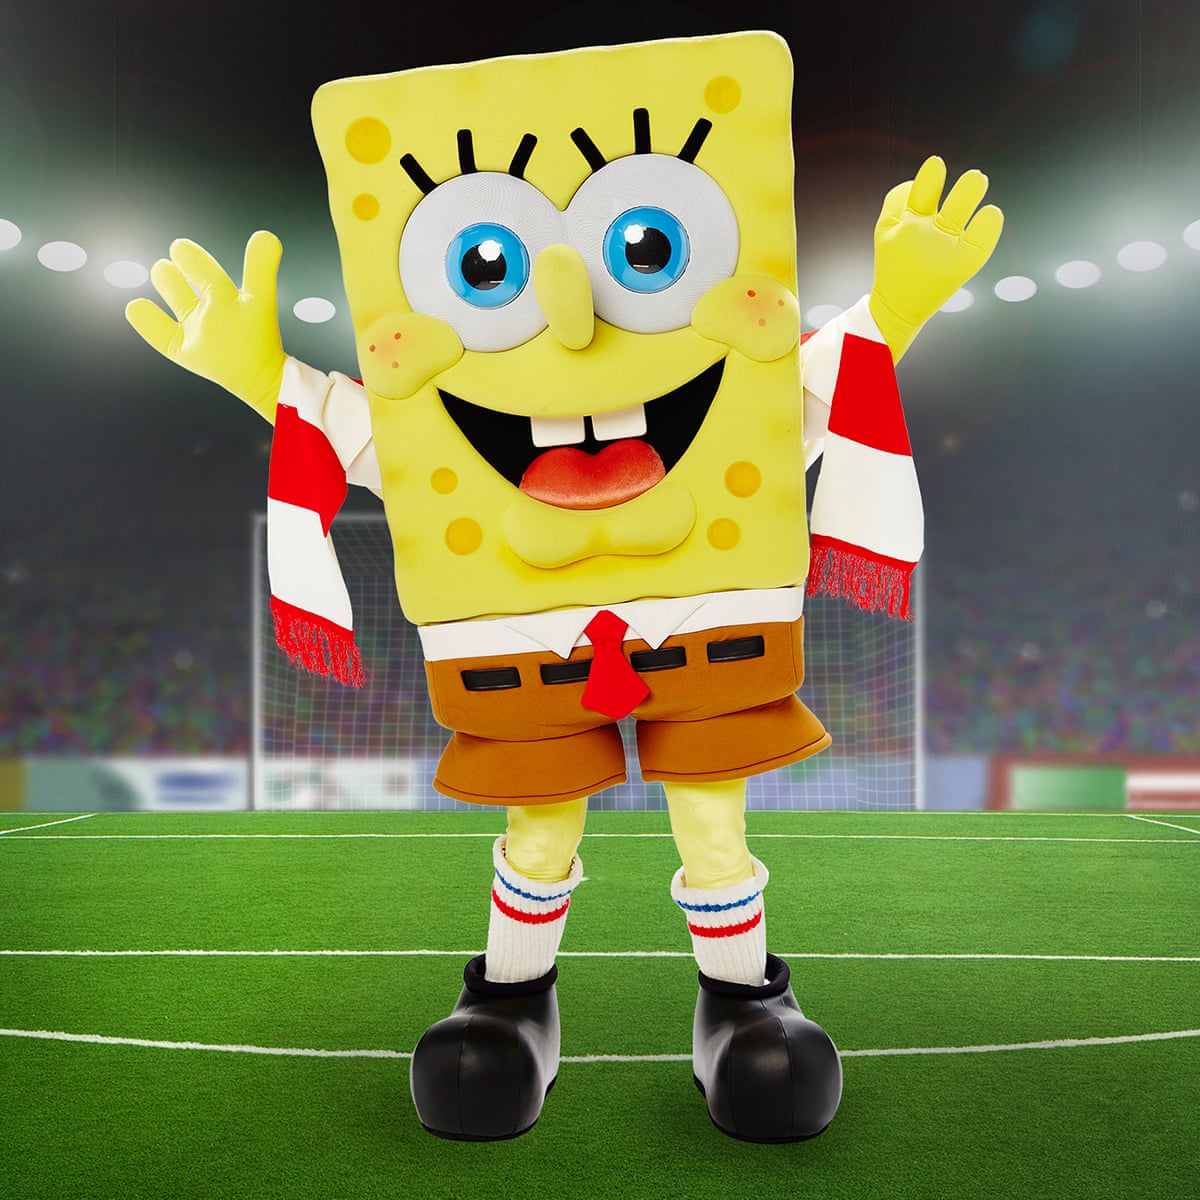 SpongeBob SquarePants to feature in football highlights show for children |  Television industry | The Guardian